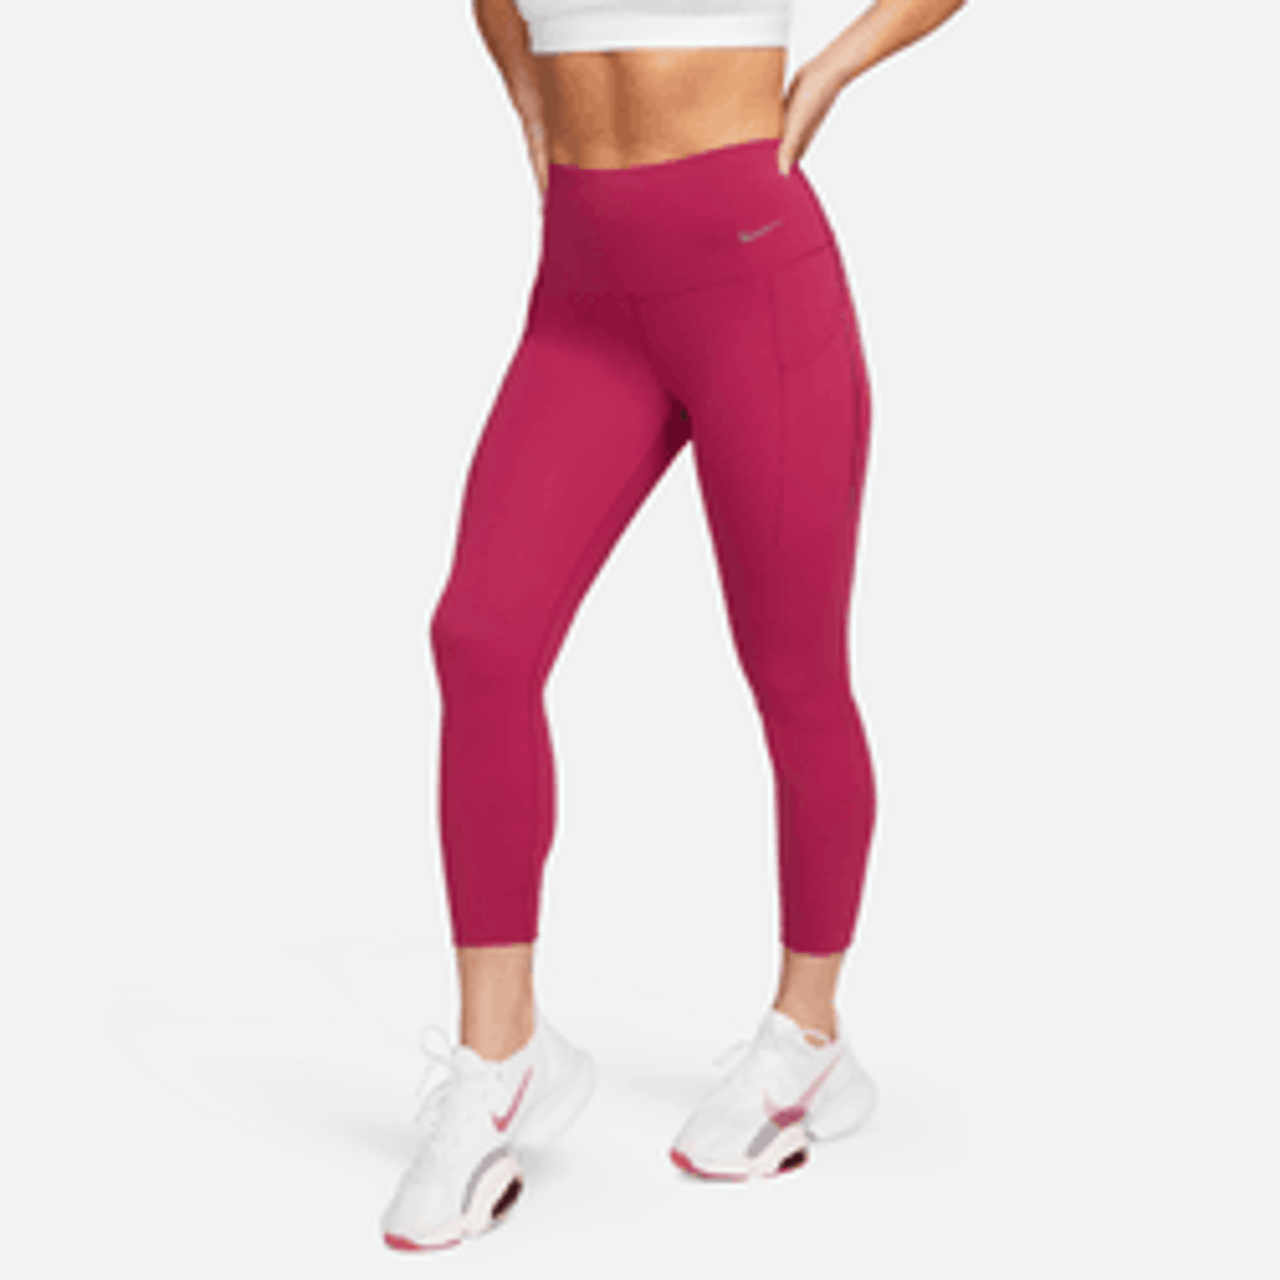 Women's FLX Performance High-Waisted 7/8 Leggings with Side Pockets